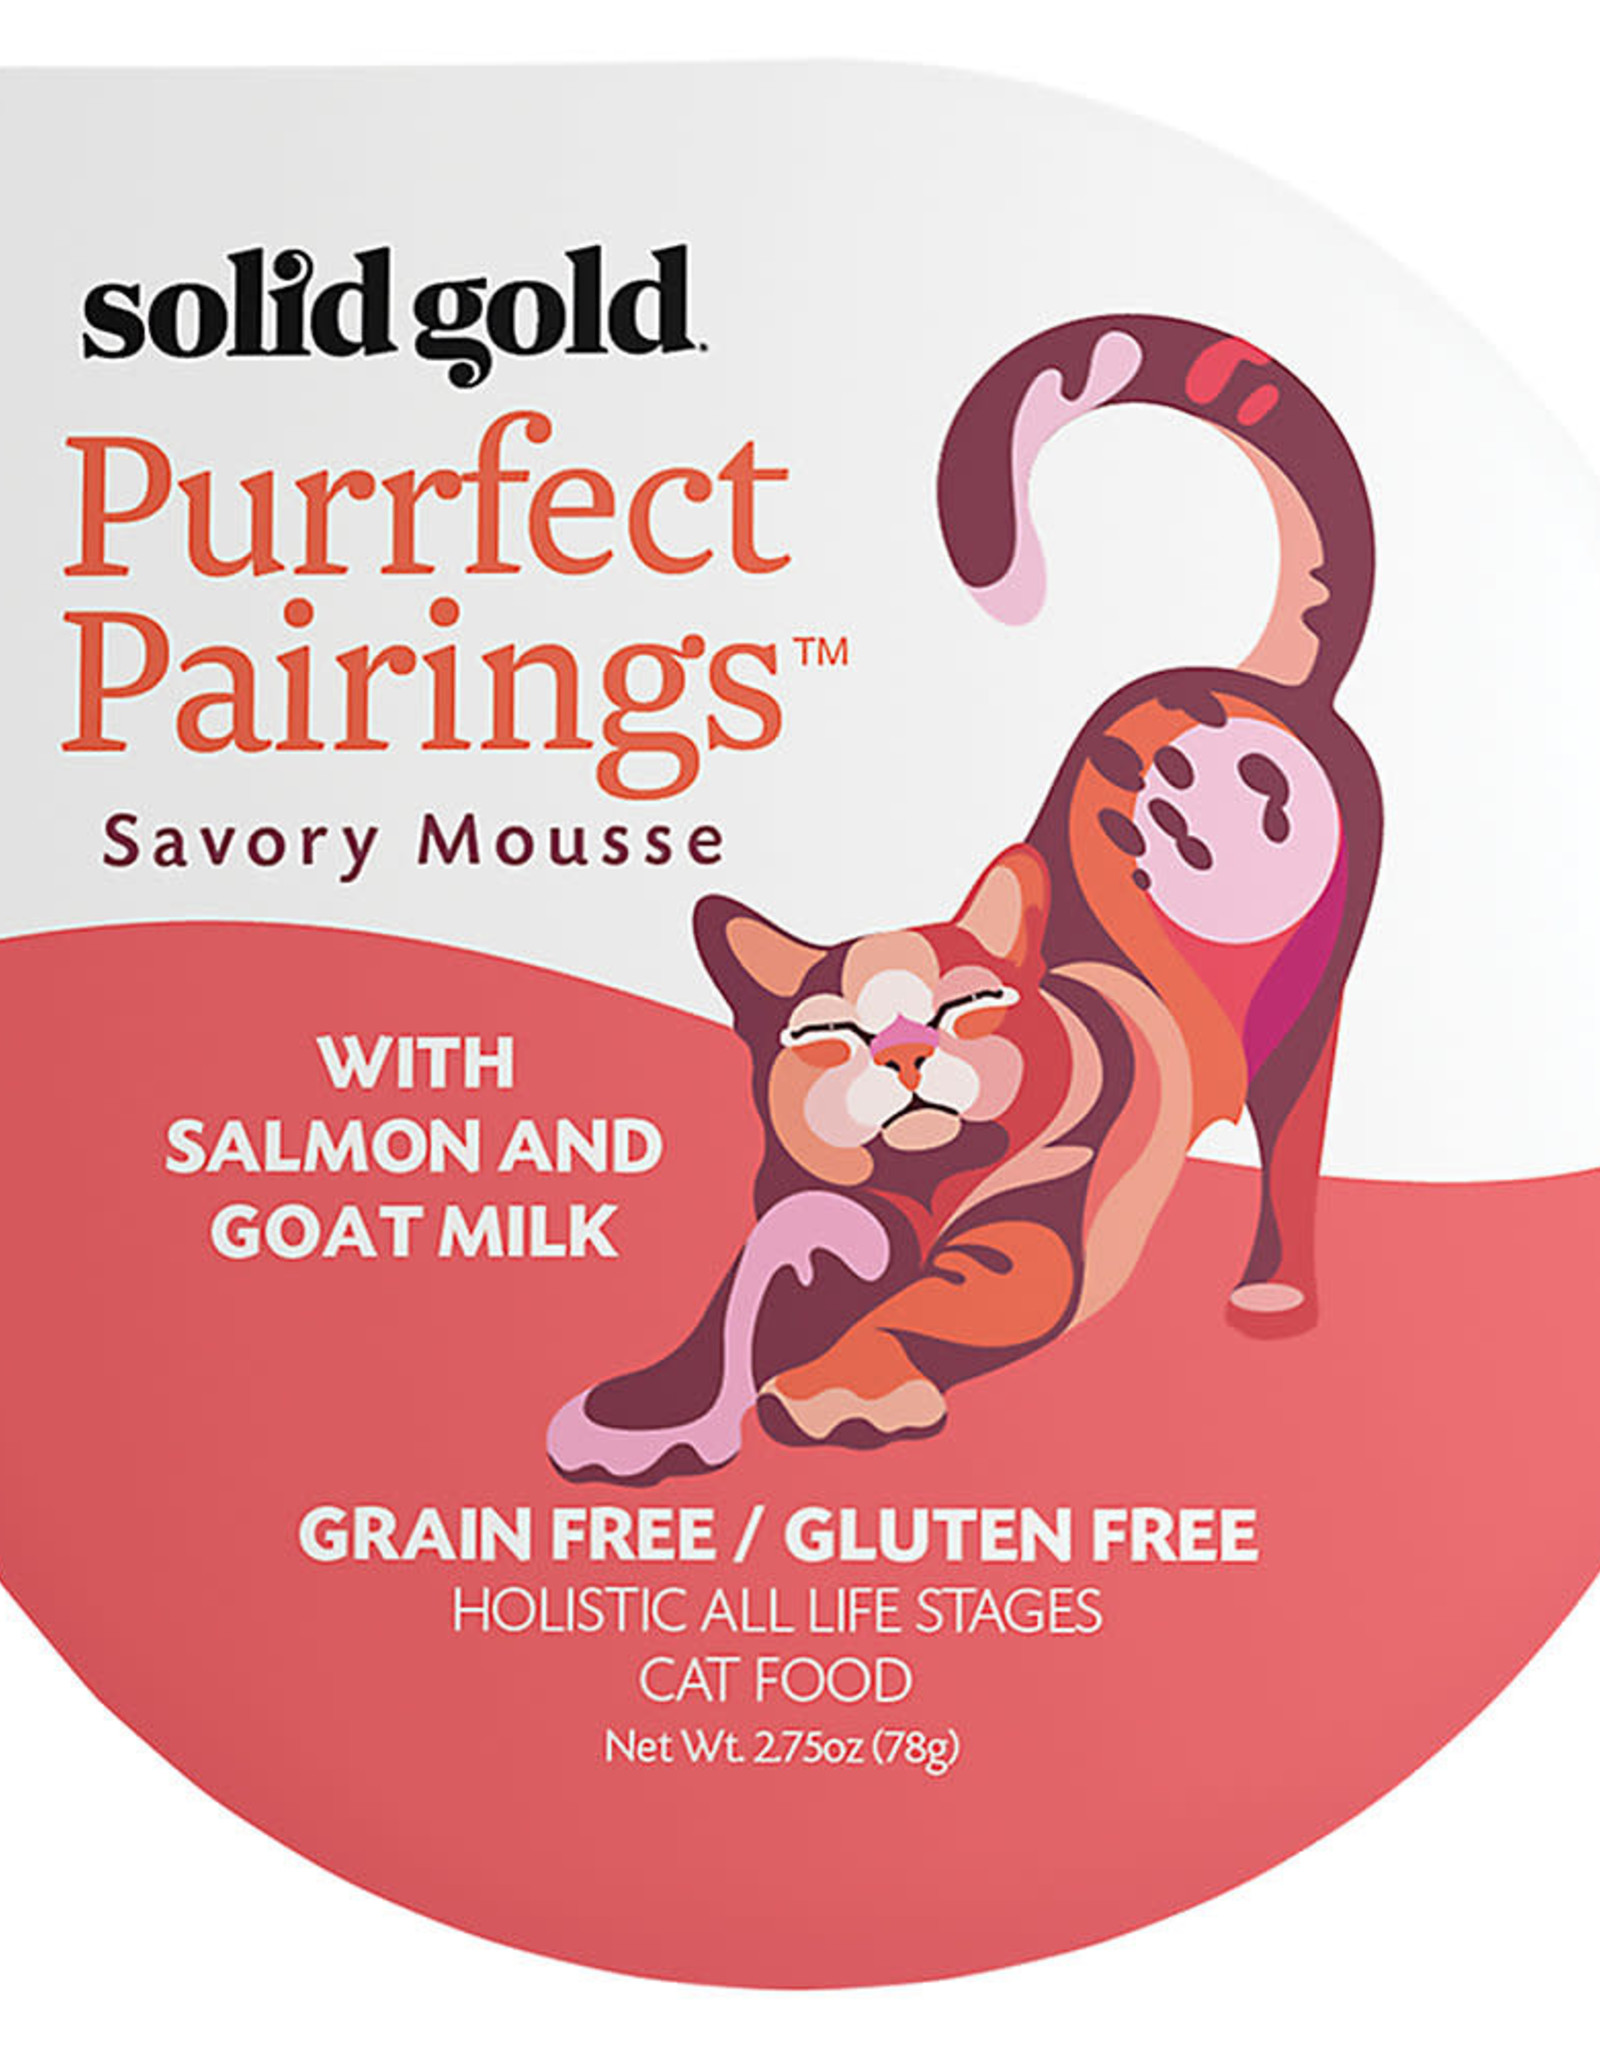 Solid Gold Purrfect Pairing Savory Mousse Cat Food Grain Free Gluten Free 2.7 oz